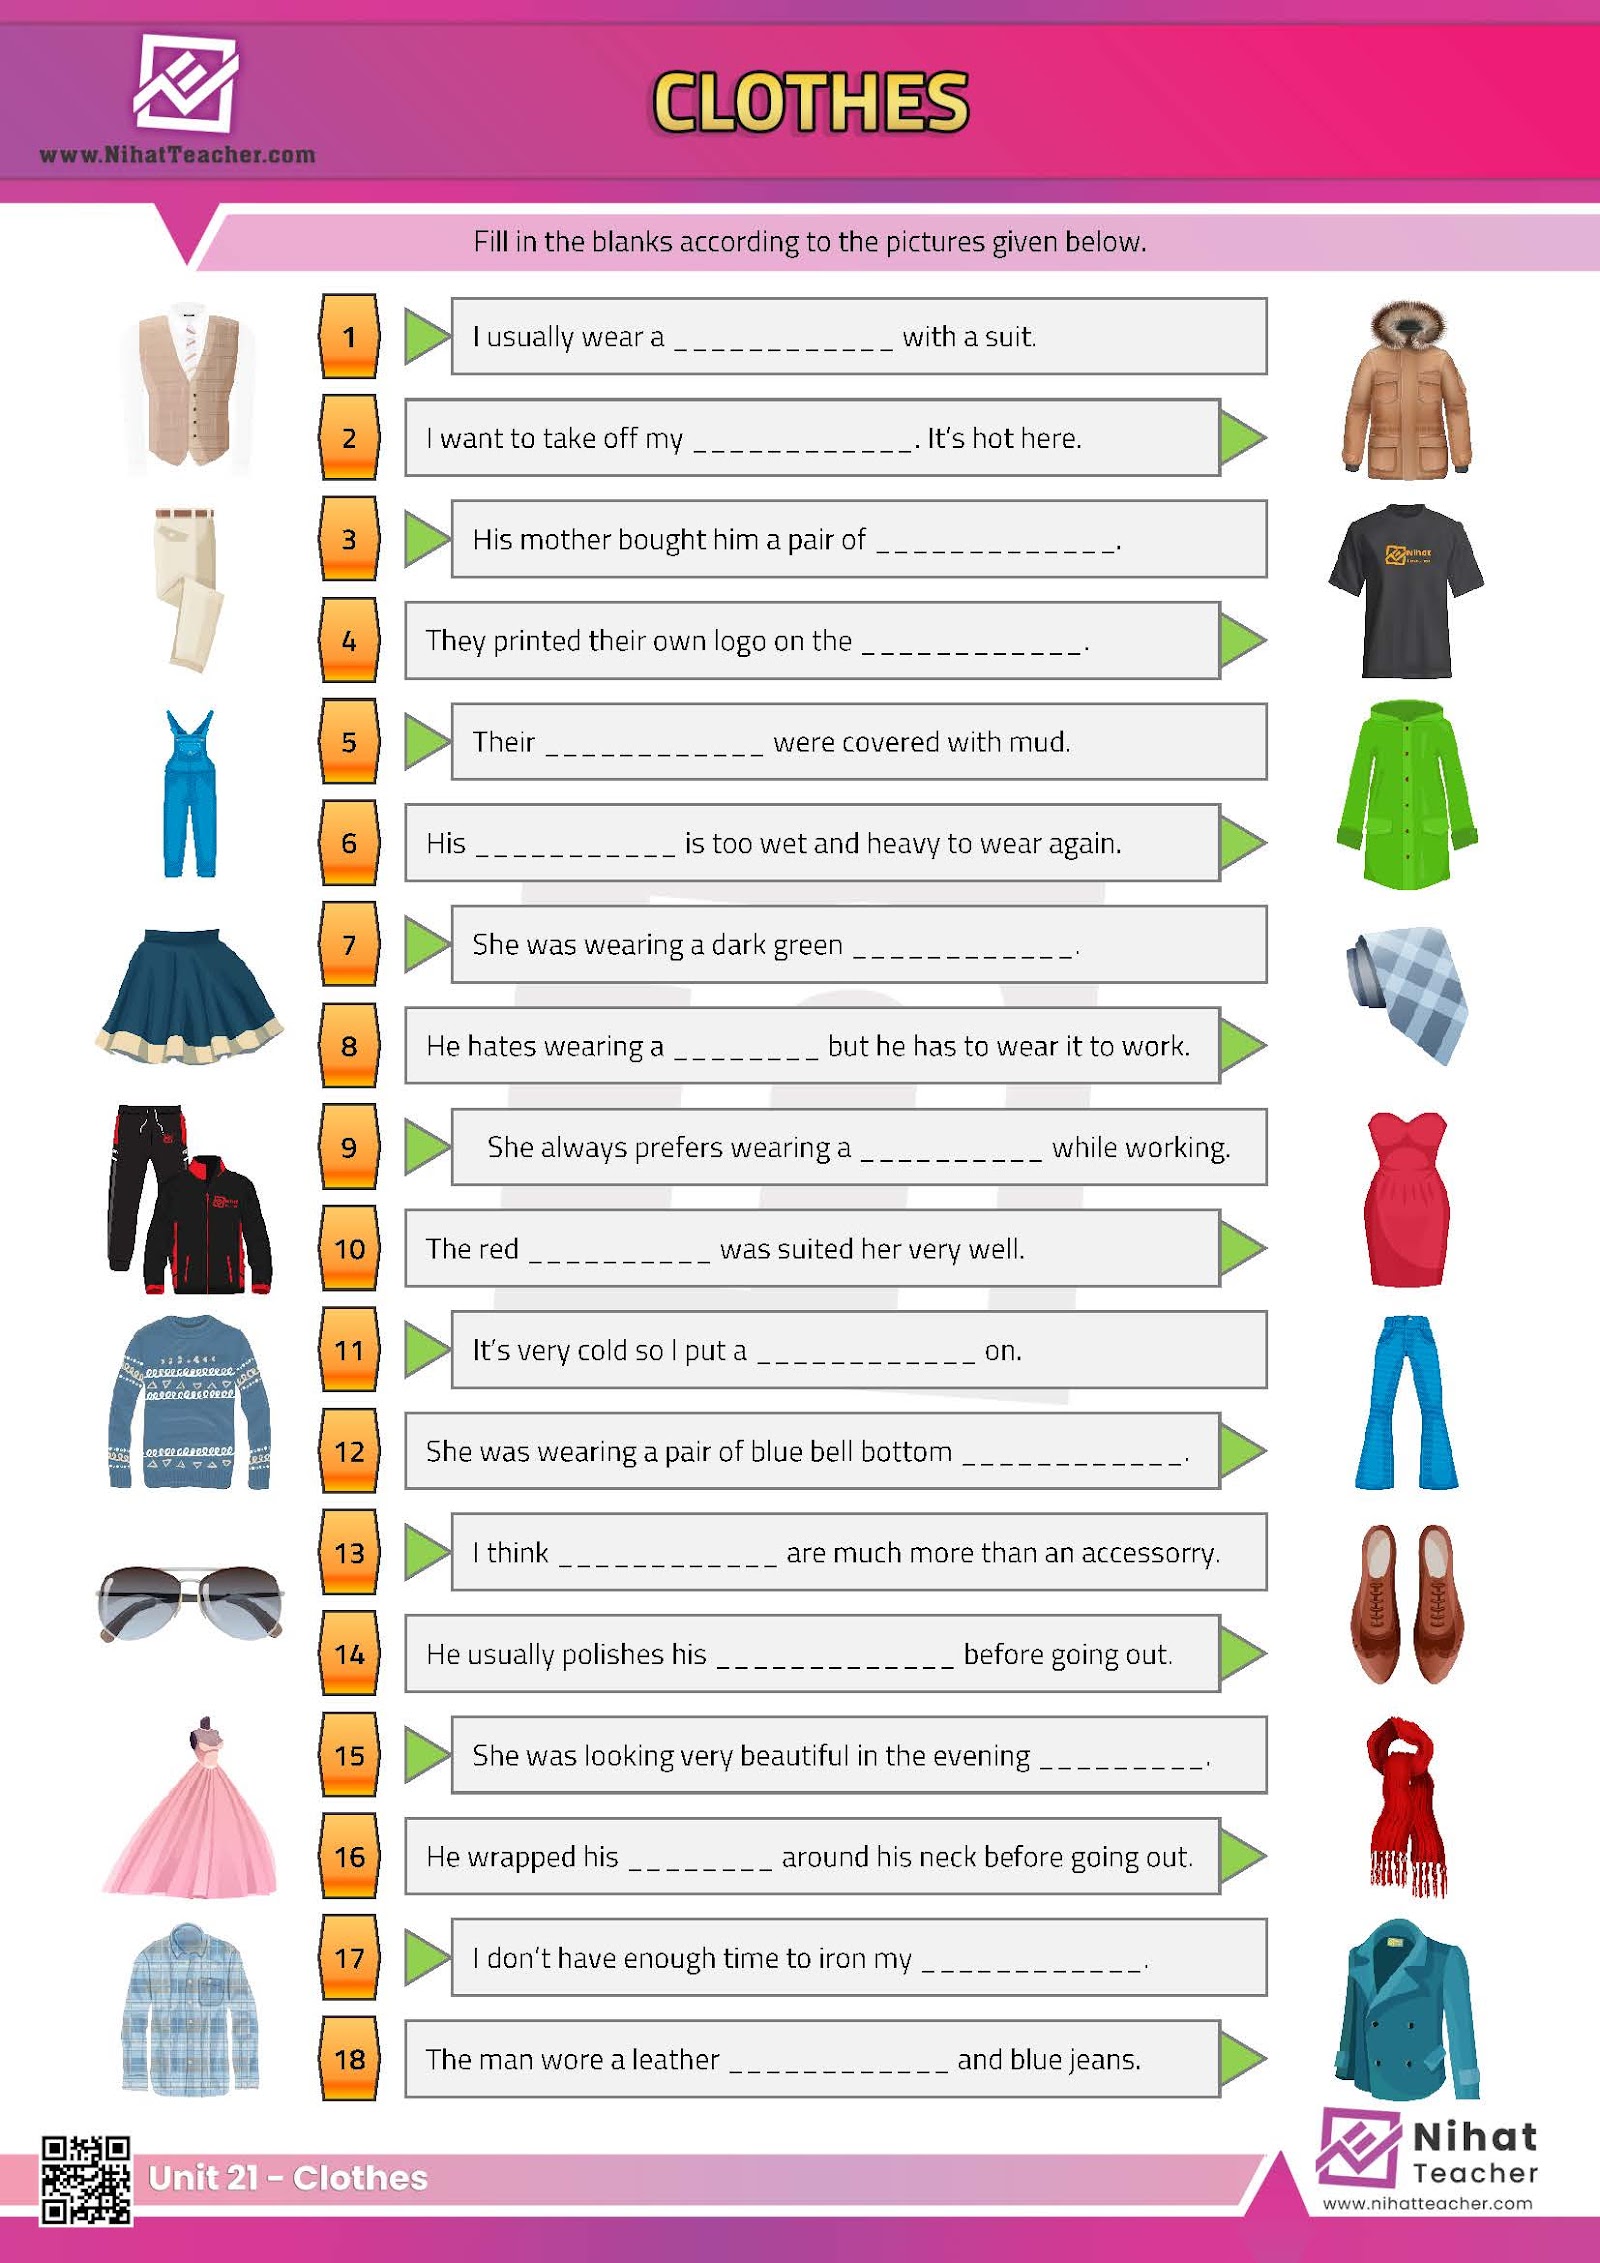 Unit 21 - Clothes Worksheet 2 - Free English learning and teaching